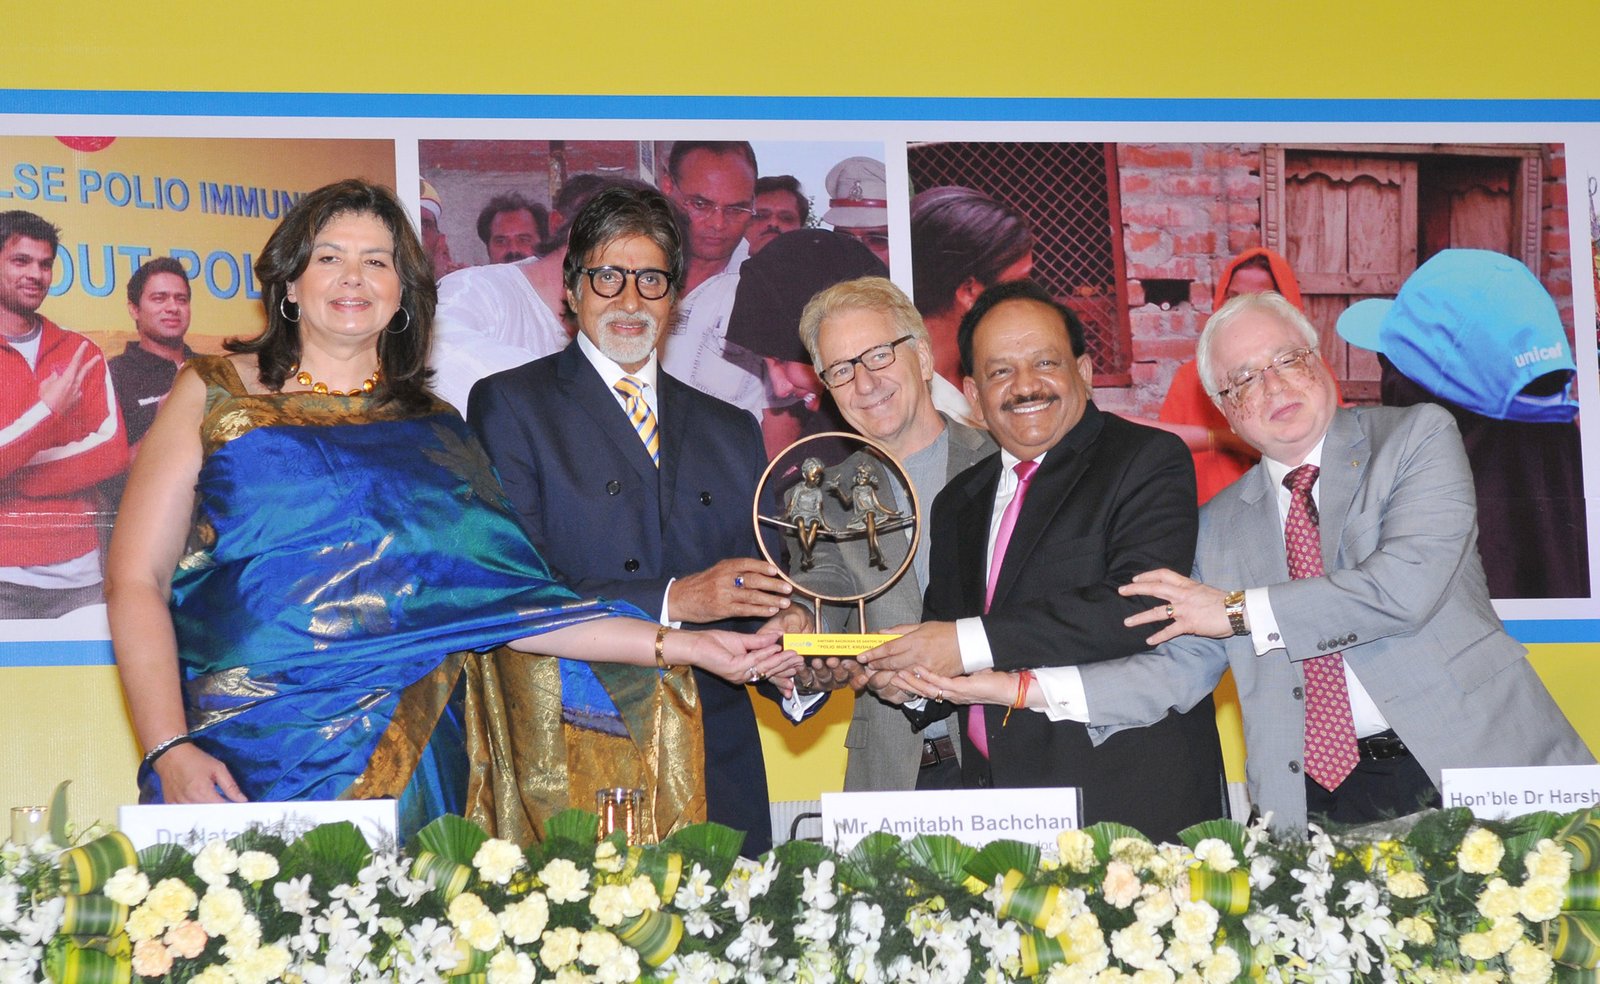 The Union Minister for Health and Family Welfare, Dr Harsh Vardhan and the UNICEF representative for India, Mr Louis-Georges Arsenault presented the memento of appreciation to the Goodwill Ambassador, UNICEF, Shri Amitabh Bachchan